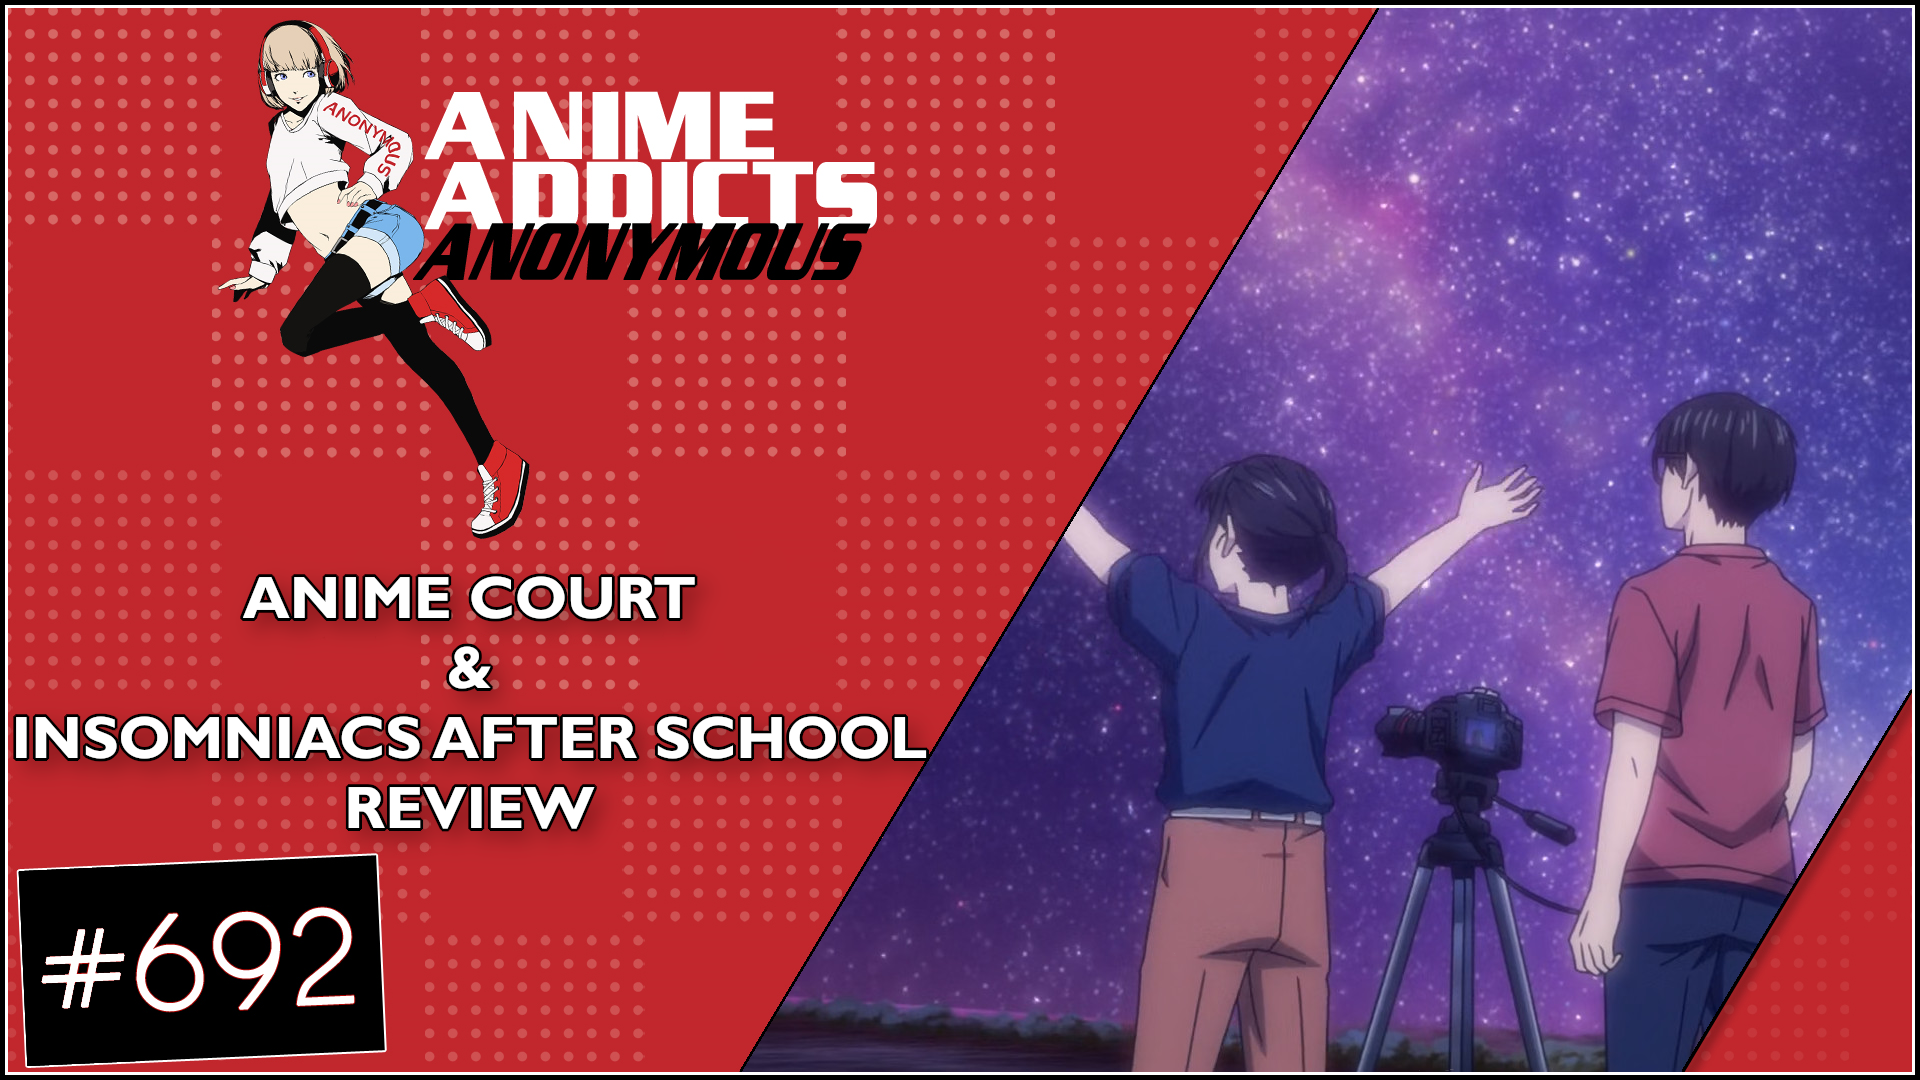 AAAPodcast - Anime Addicts Anonymous Podcast Episode 525